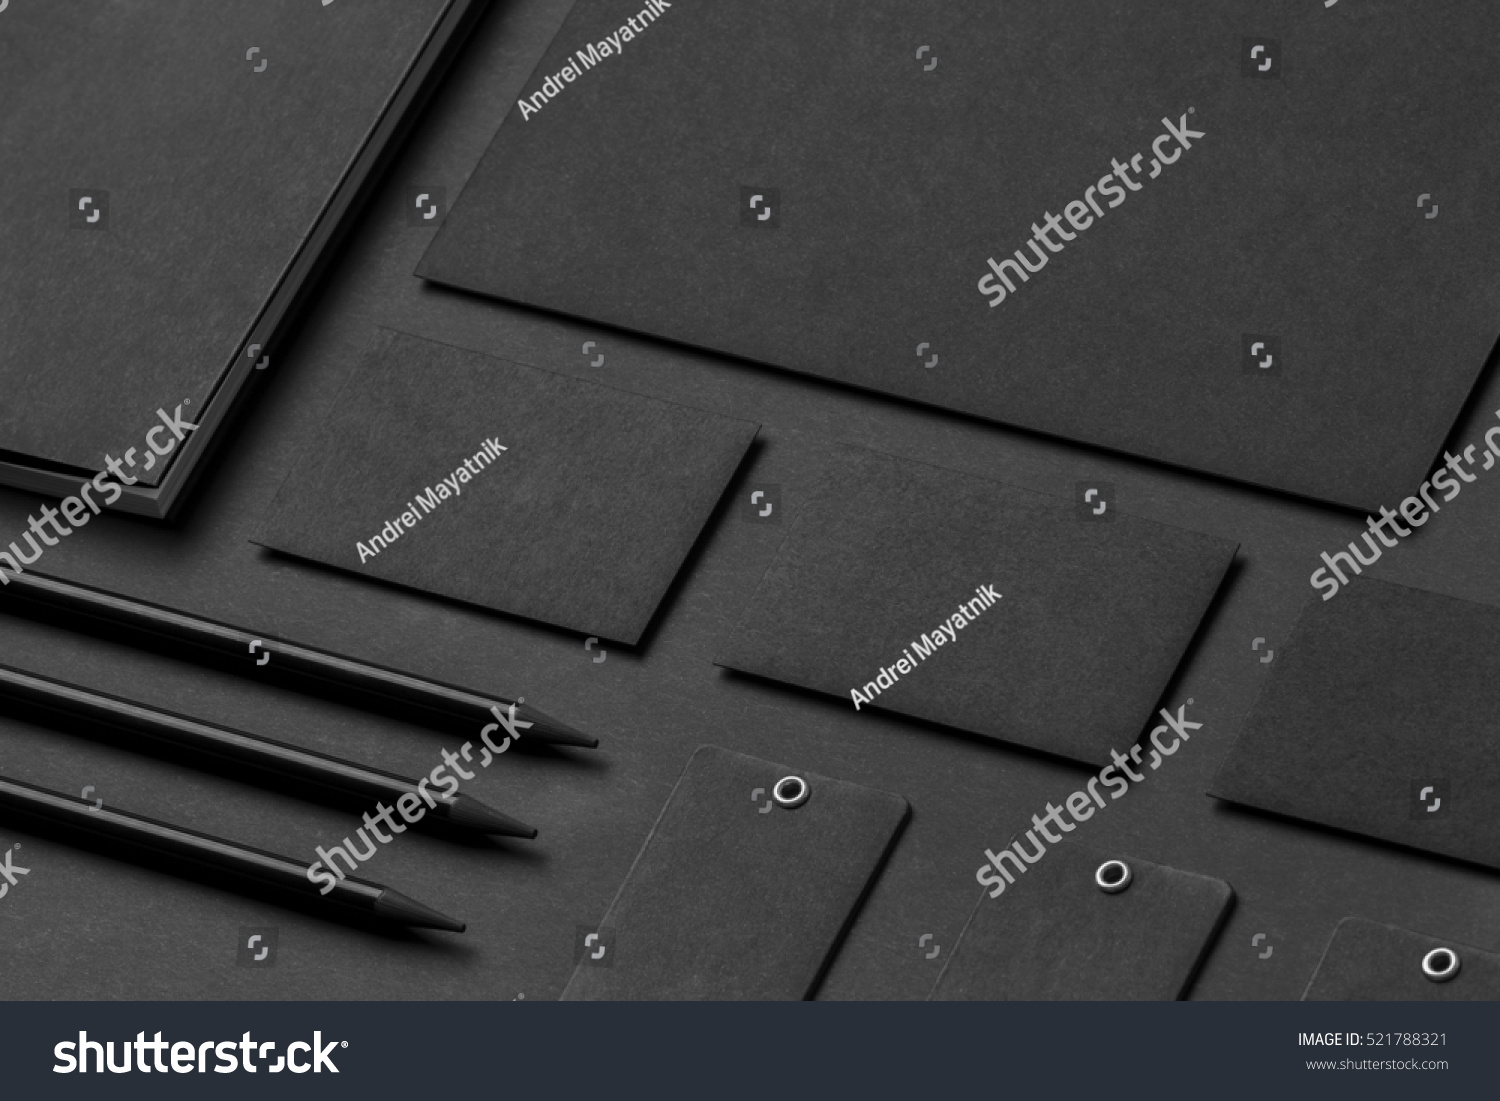 Brand identity mockup. Blank corporate stationery set at black textured paper background. #521788321